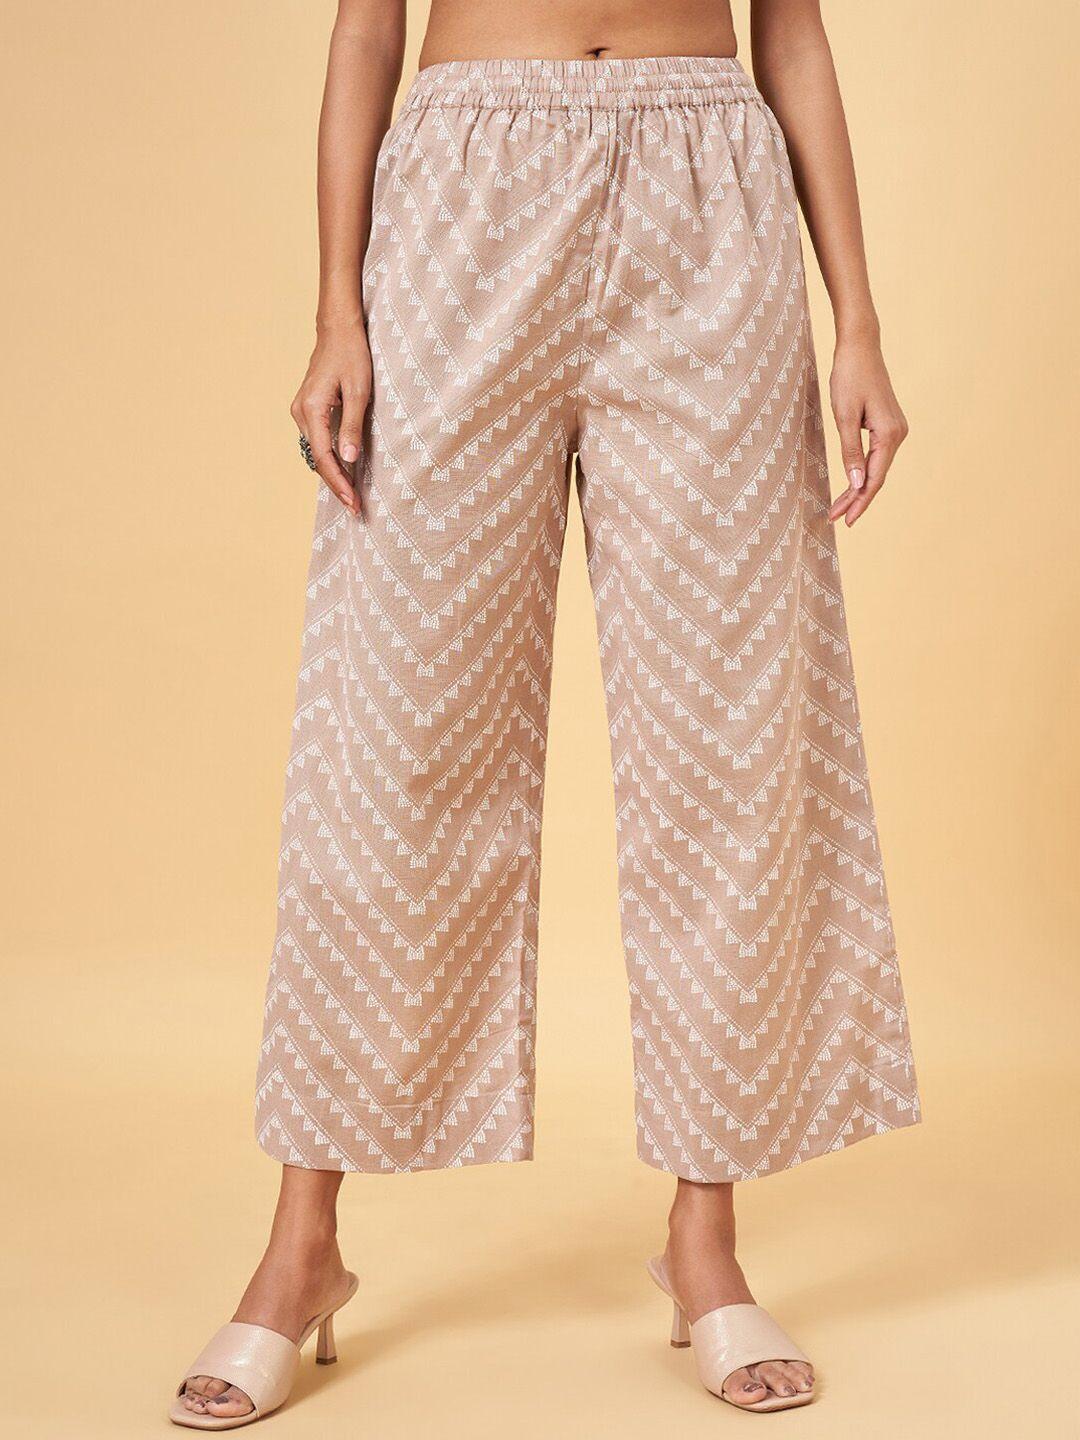 rangmanch-by-pantaloons-women-mid-rise-geometric-printed-parallel-trousers